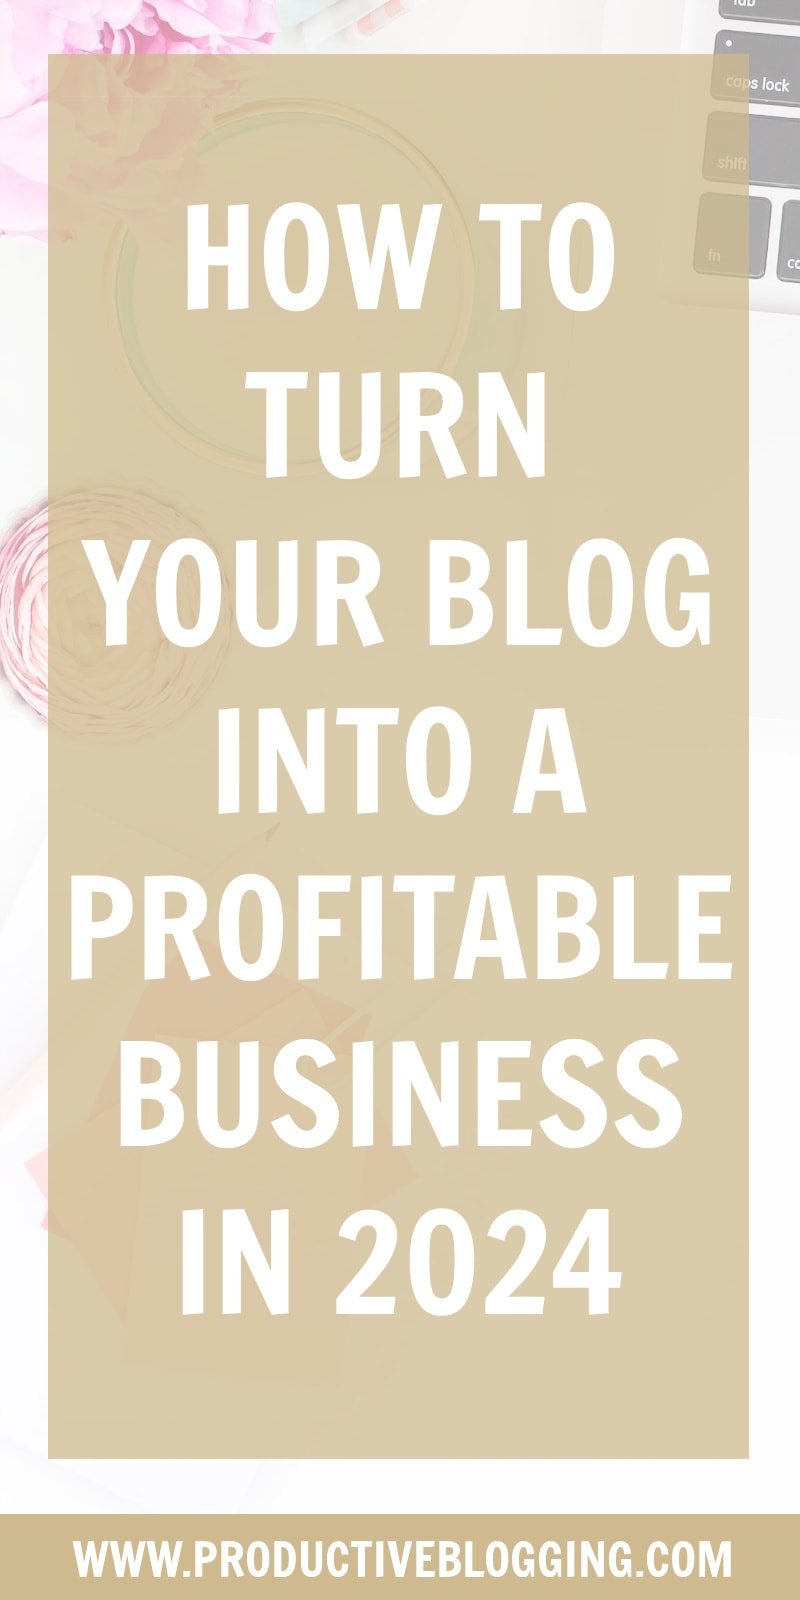 So you have a blog, but it’s not making any money yet… These are the steps you need to take to turn your blog into a profitable business in 2024… #profitableblog #makemoneyblogging #blogtobiz #blogtobusiness #blogtoprofit #bloggingforprofit #profitableblogging #successfulblogging #bloggingprofits #bloggingsuccess #blog #bloggers #blogging #solopreneur #smallbiz #bloggersofIG #productiveblogging